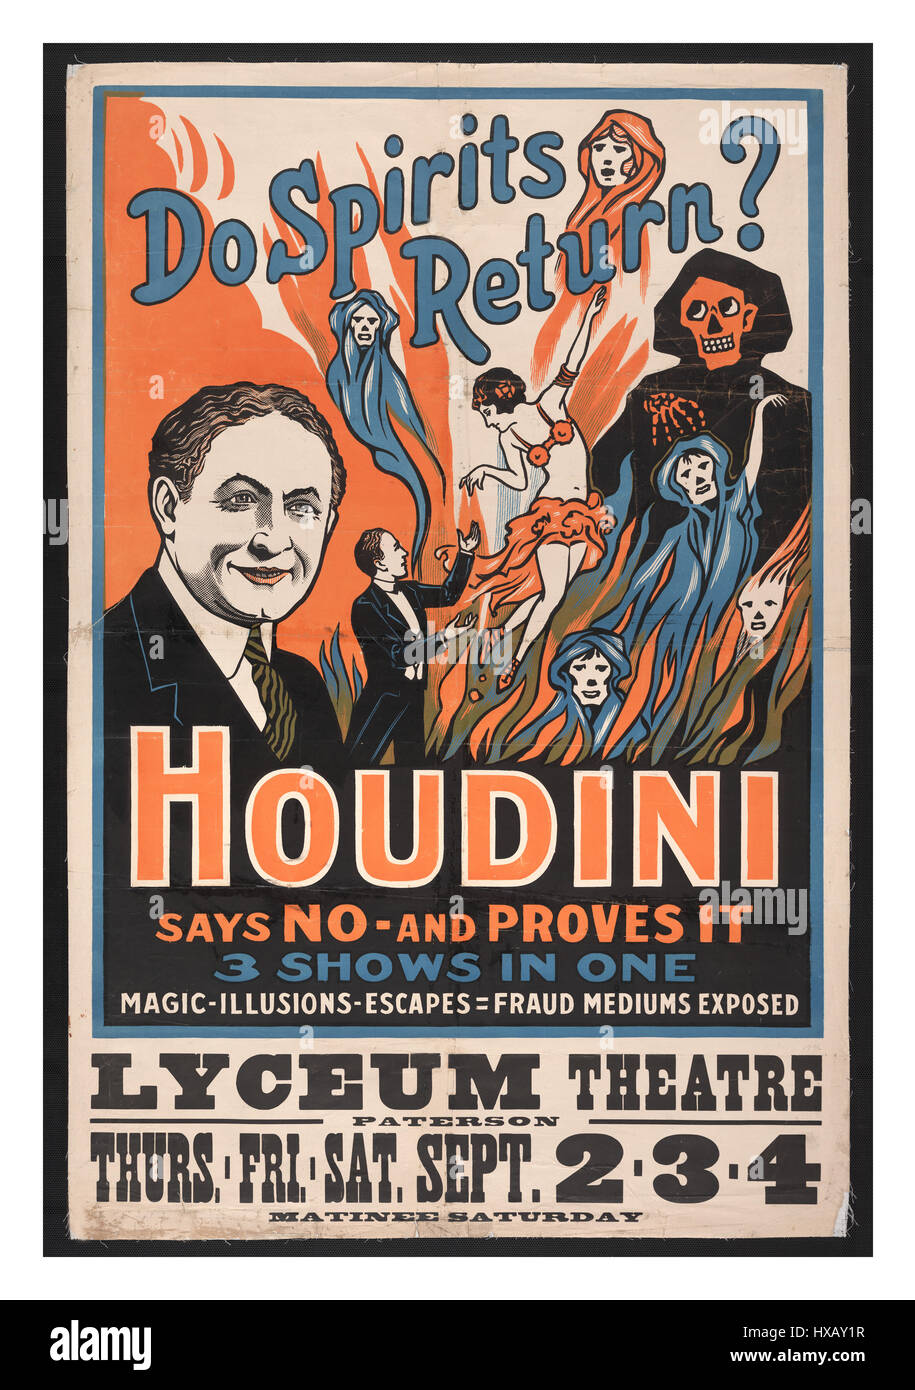 Vintage 1909 historic Houdini entertainment poster ' Do Spirits Return?' Houdini says NO - and proves it. 3 Shows in one : magic, illusions, escapes, fraud and mediums exposed... Stock Photo